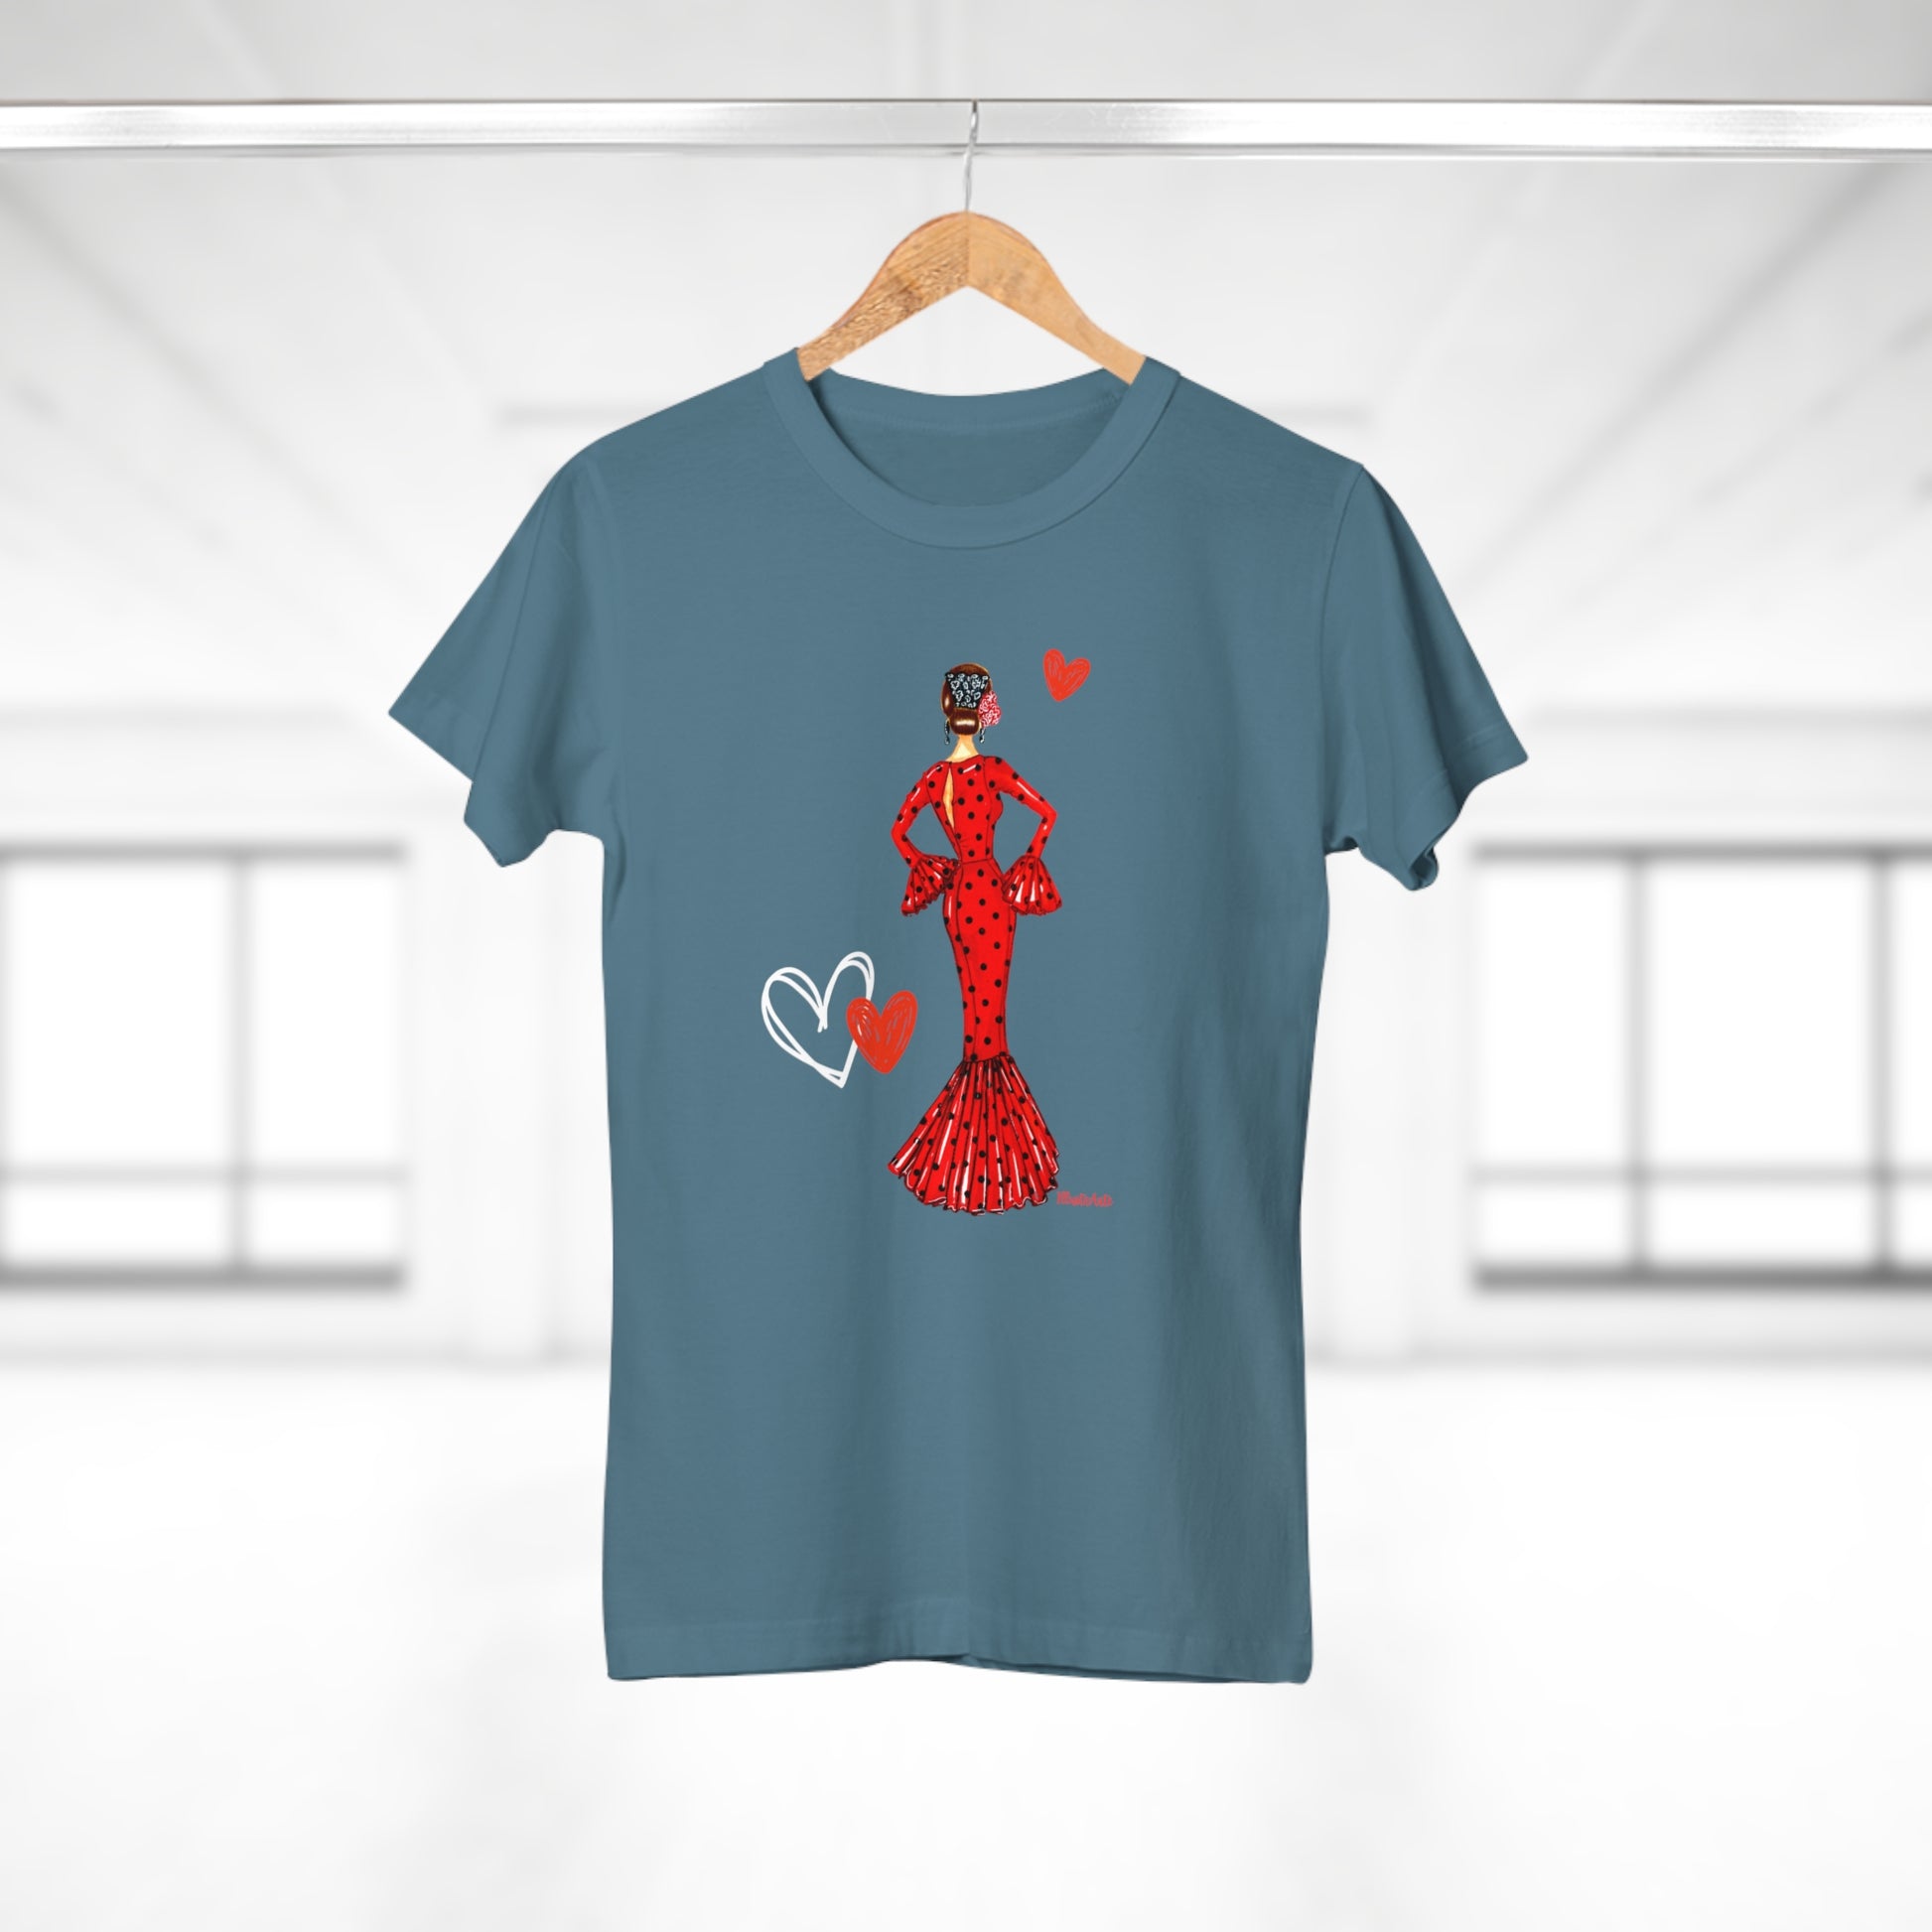 a t - shirt with a woman in a red dress holding a heart